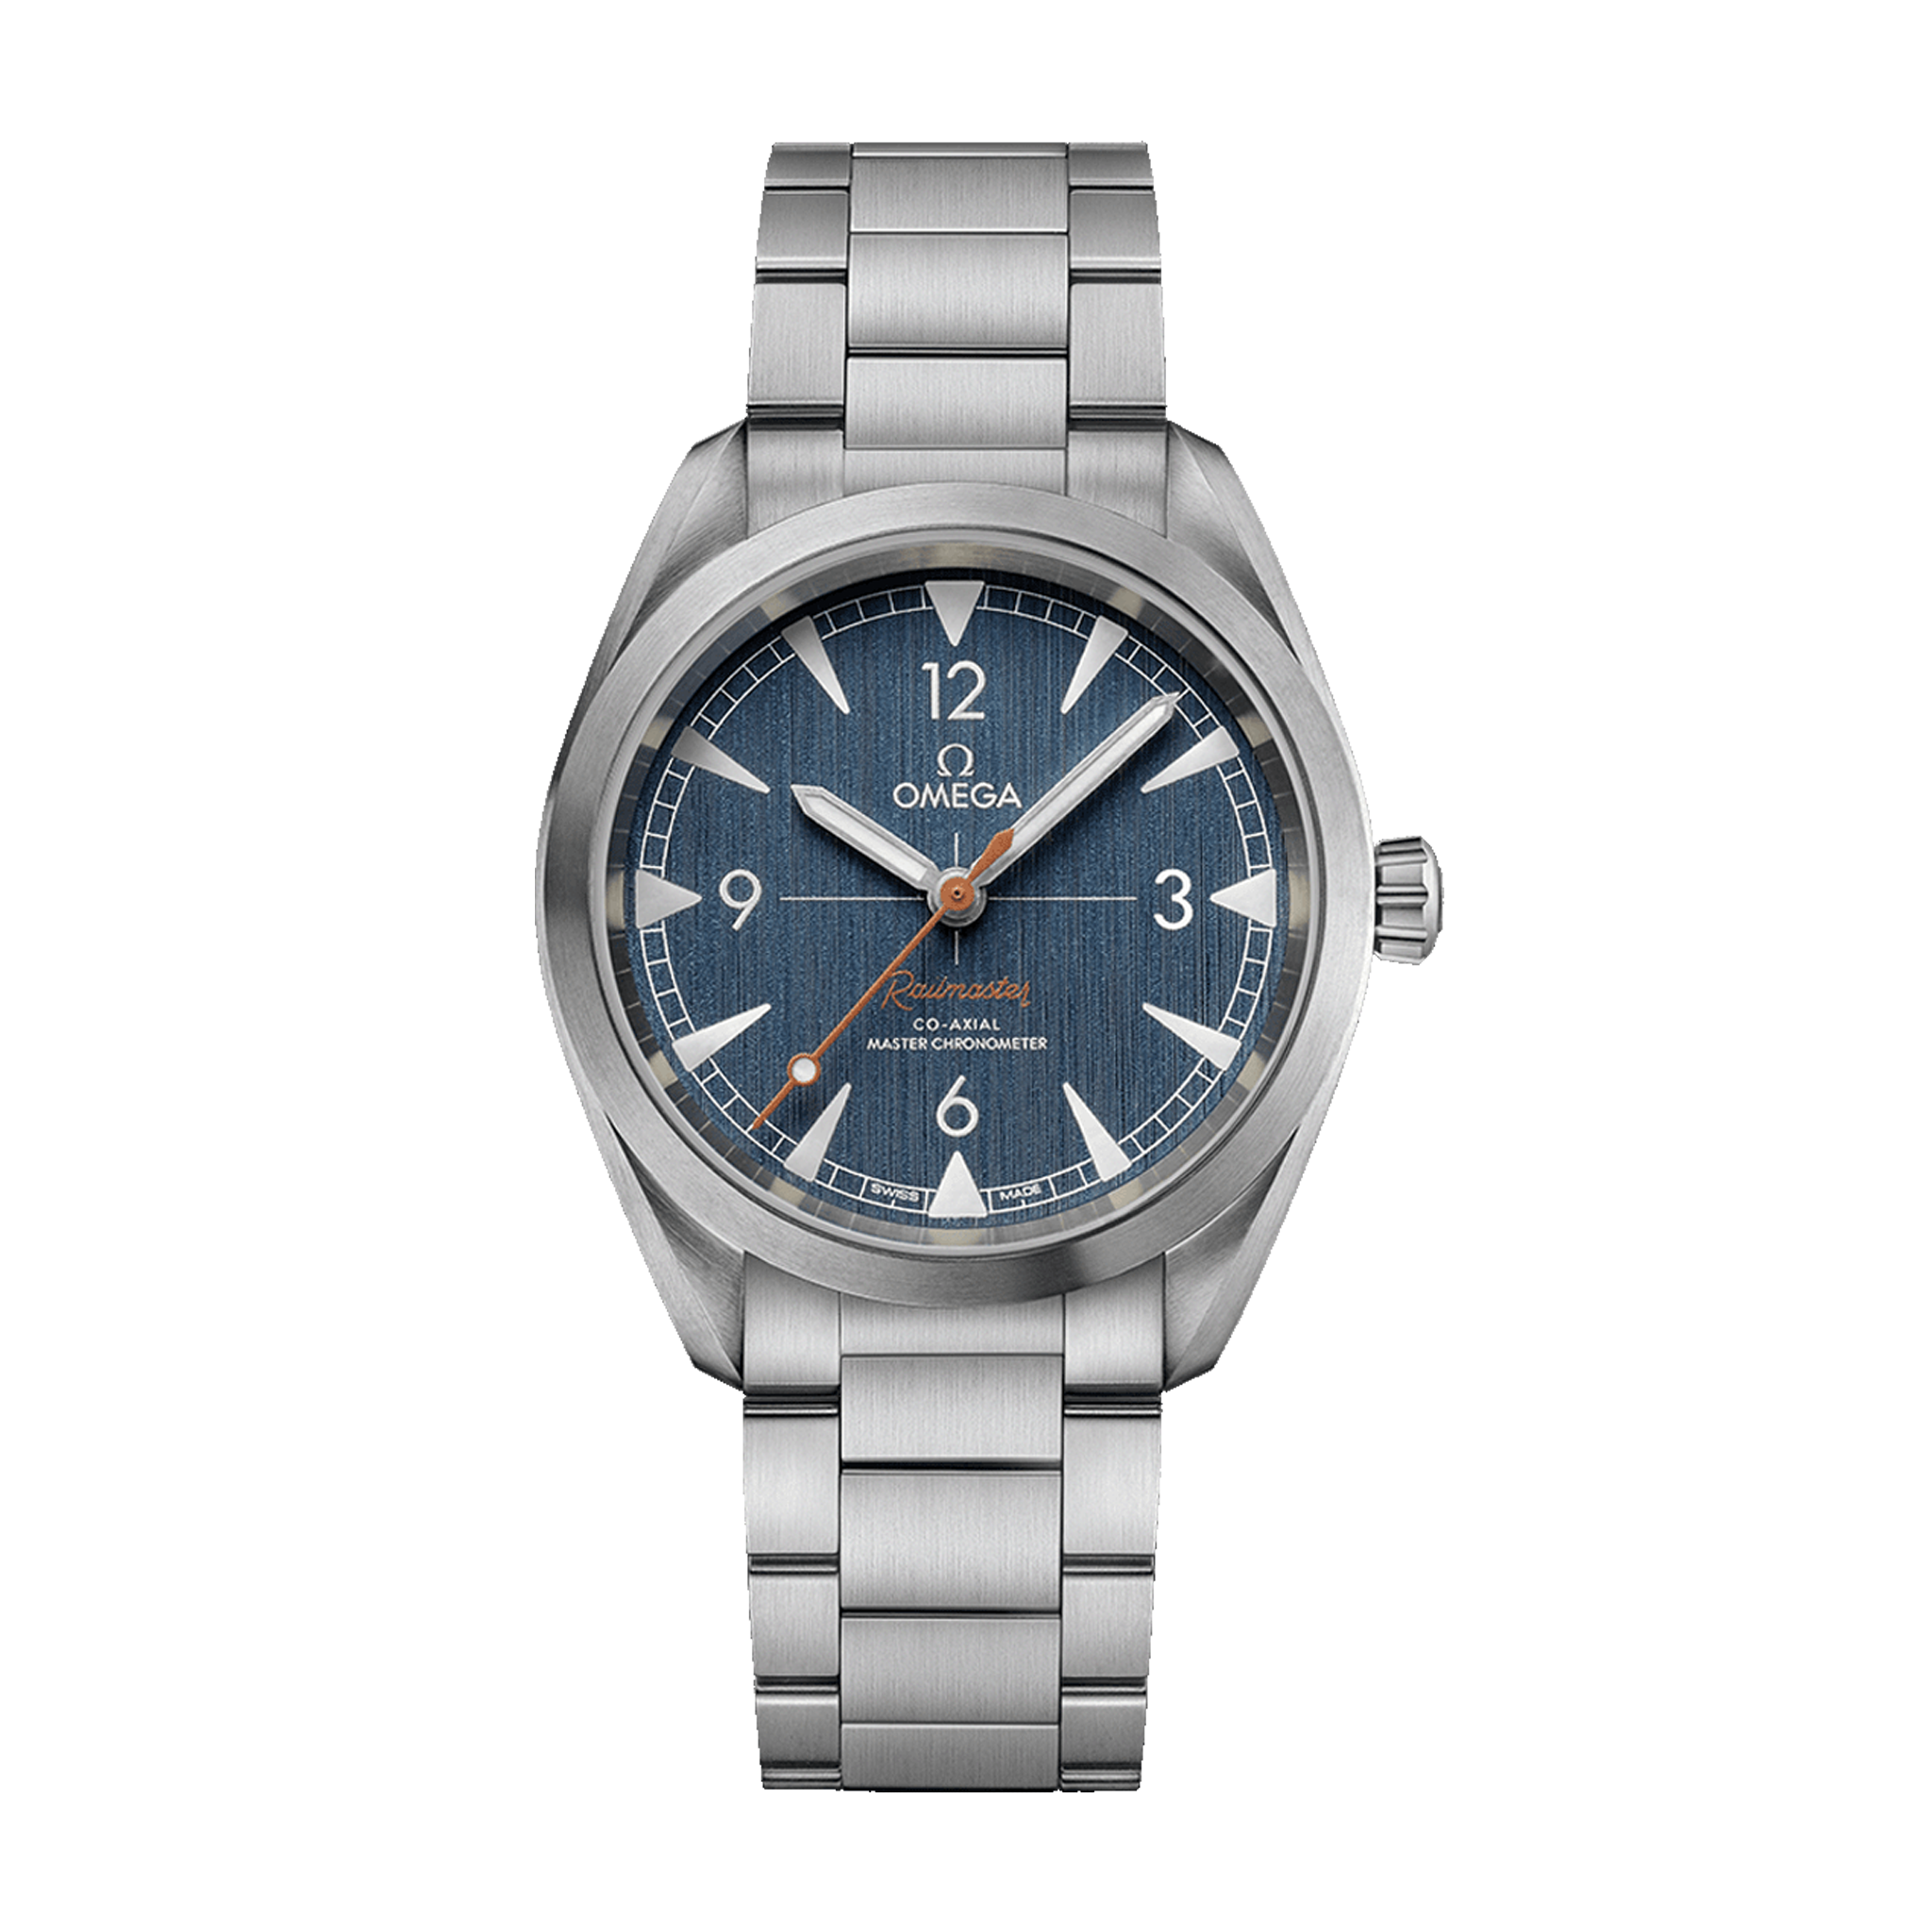 Seamaster Railmaster Co-Axial Master Chronometer 40 mm - Front